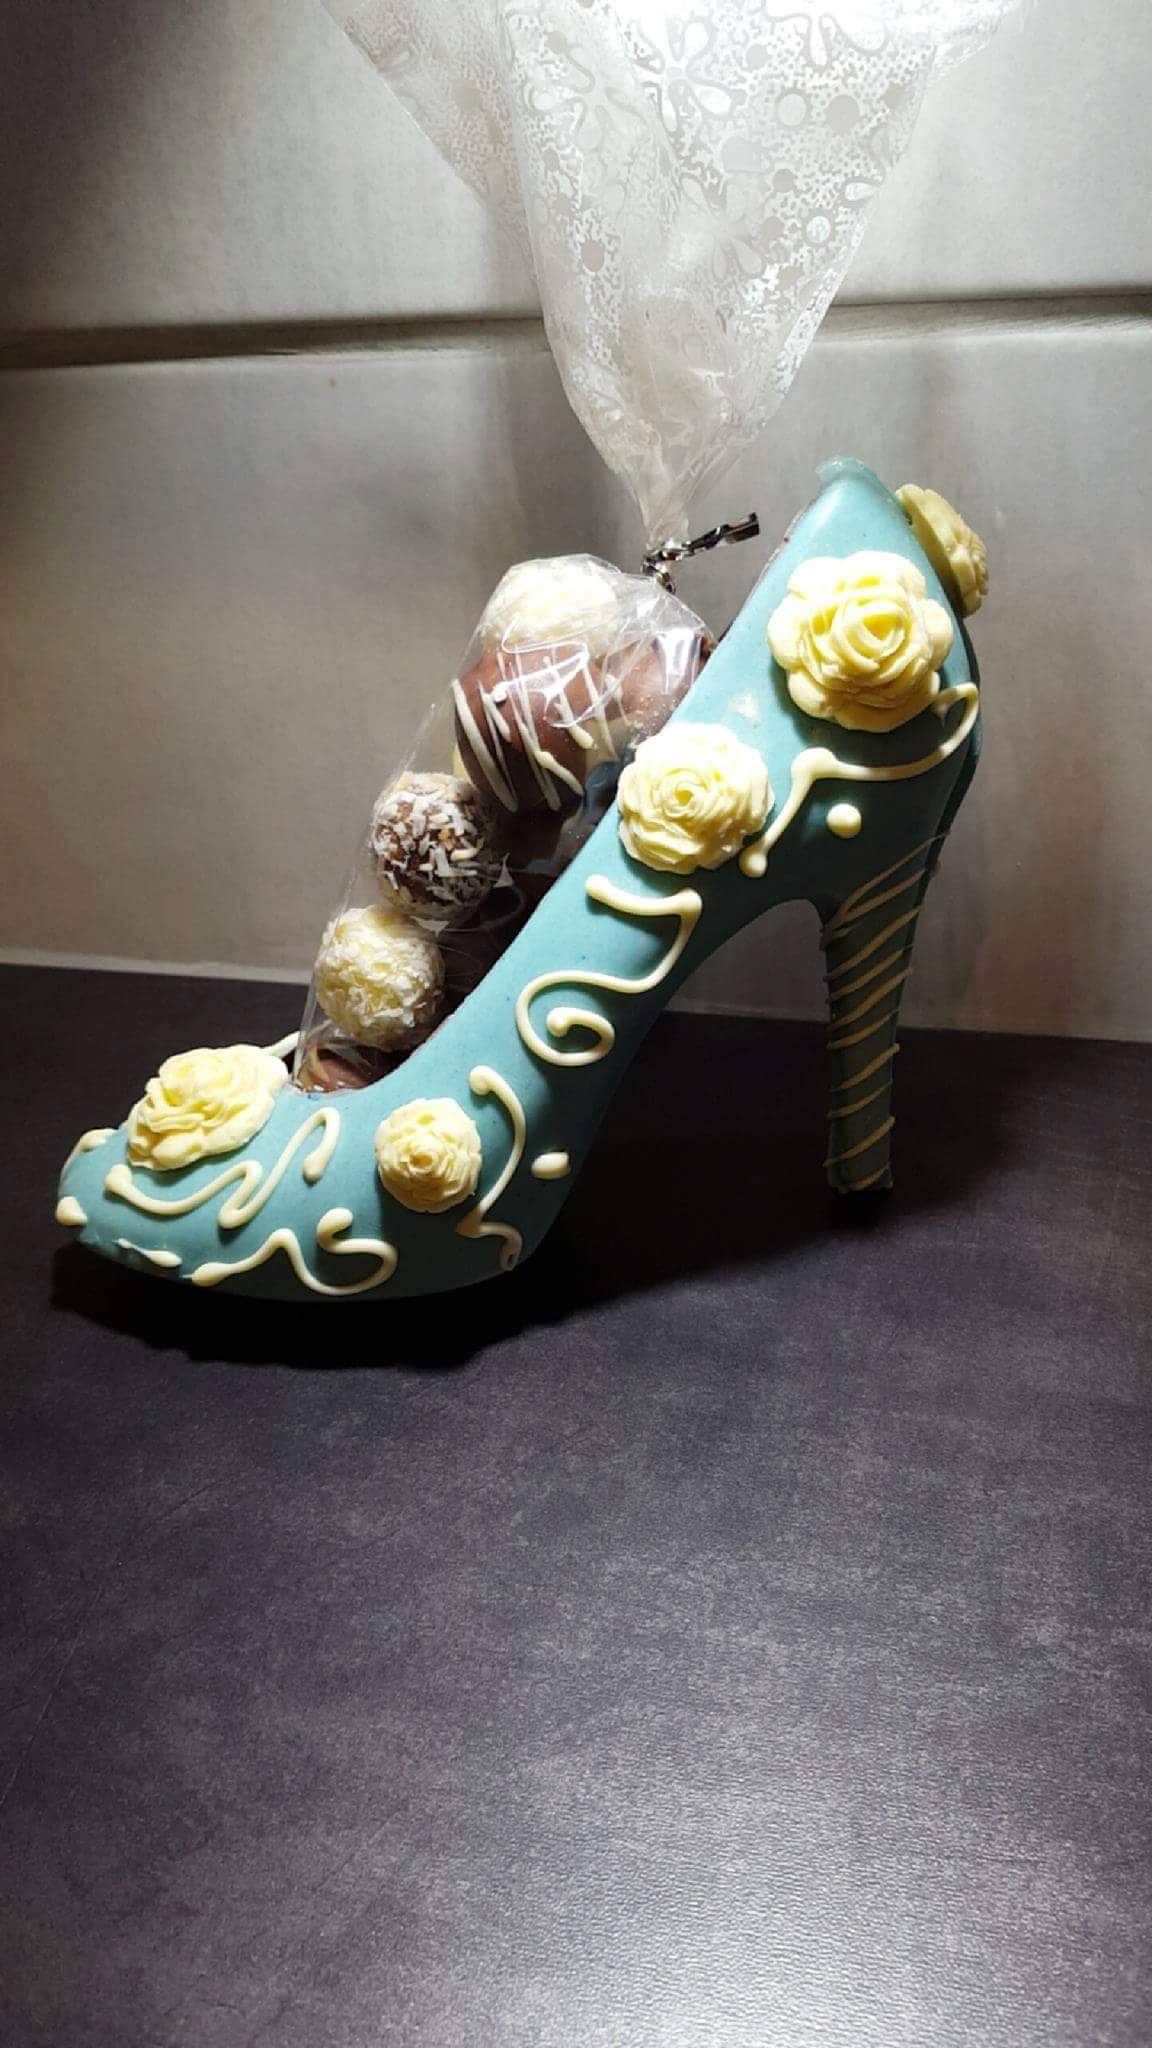 Chocolate stilettos - just the thing for the red carpet in Cannes |  Catherine Shoard | The Guardian